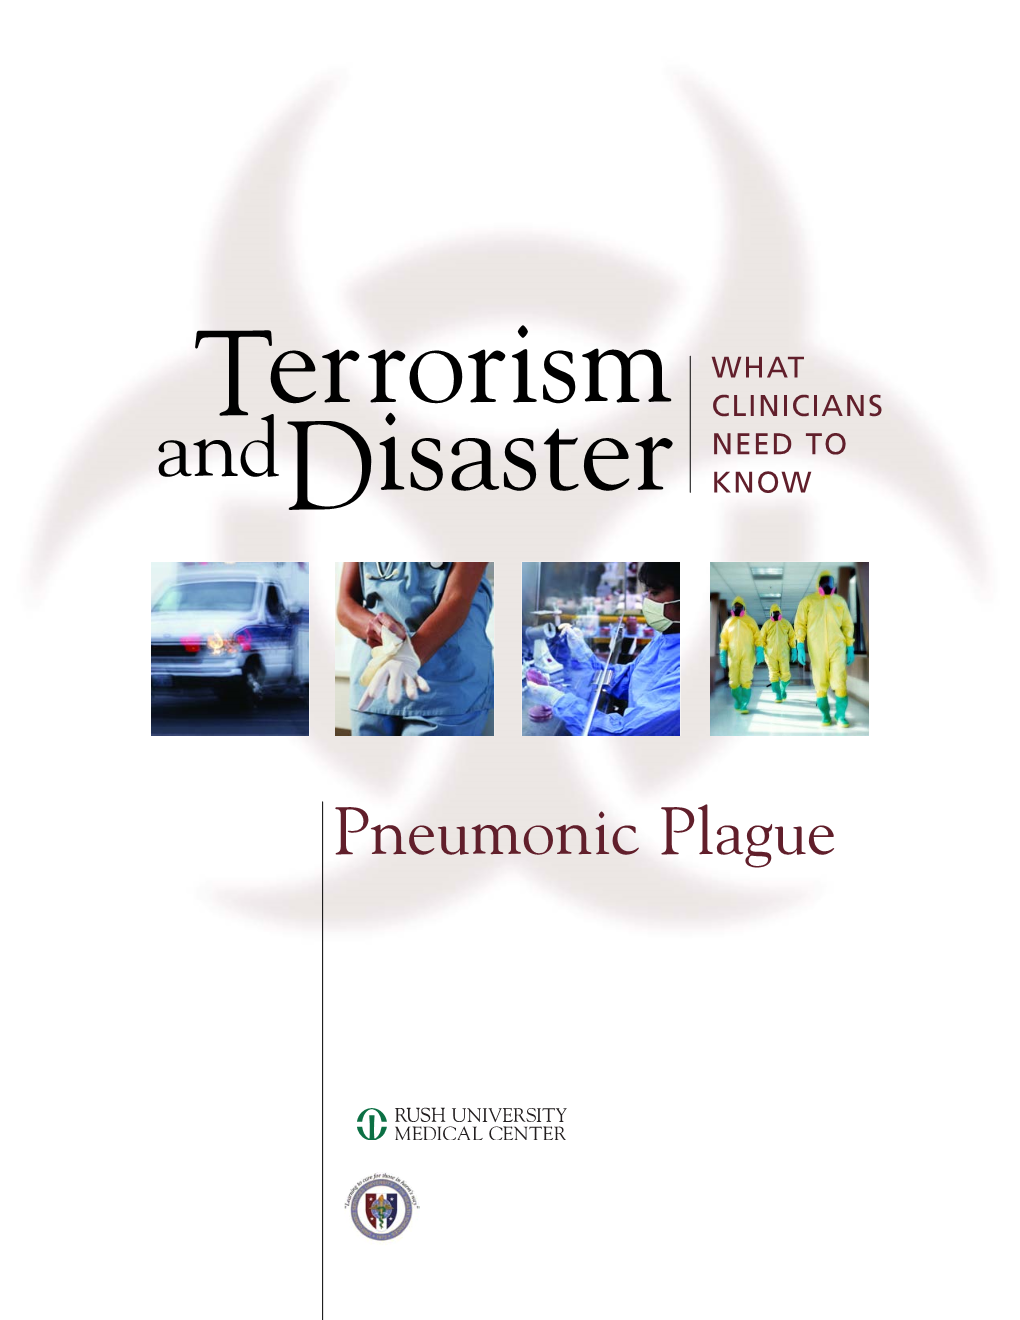 Pneumonic Plague Errorism WHAT T CLINICIANS and NEED to Disaster KNOW